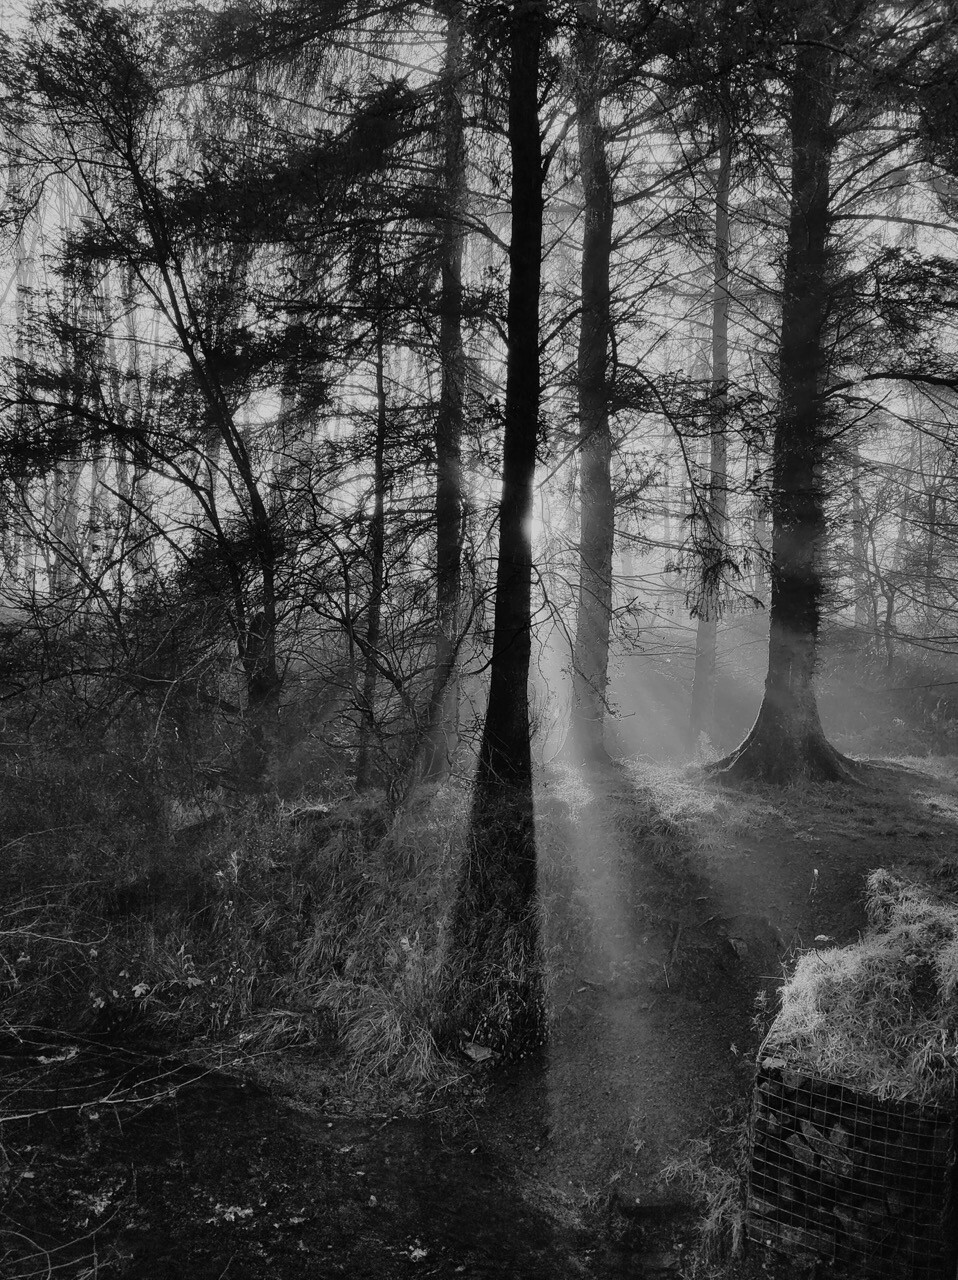 Black and white portrait format image showing shafts of early morning sunlight penetrating the tall, straight trunks of Scots pine trees and casting dark shadows in woodland. The sun is hidden behind one of the tree trunks so all of the beams of light seem to emanate from behind it.